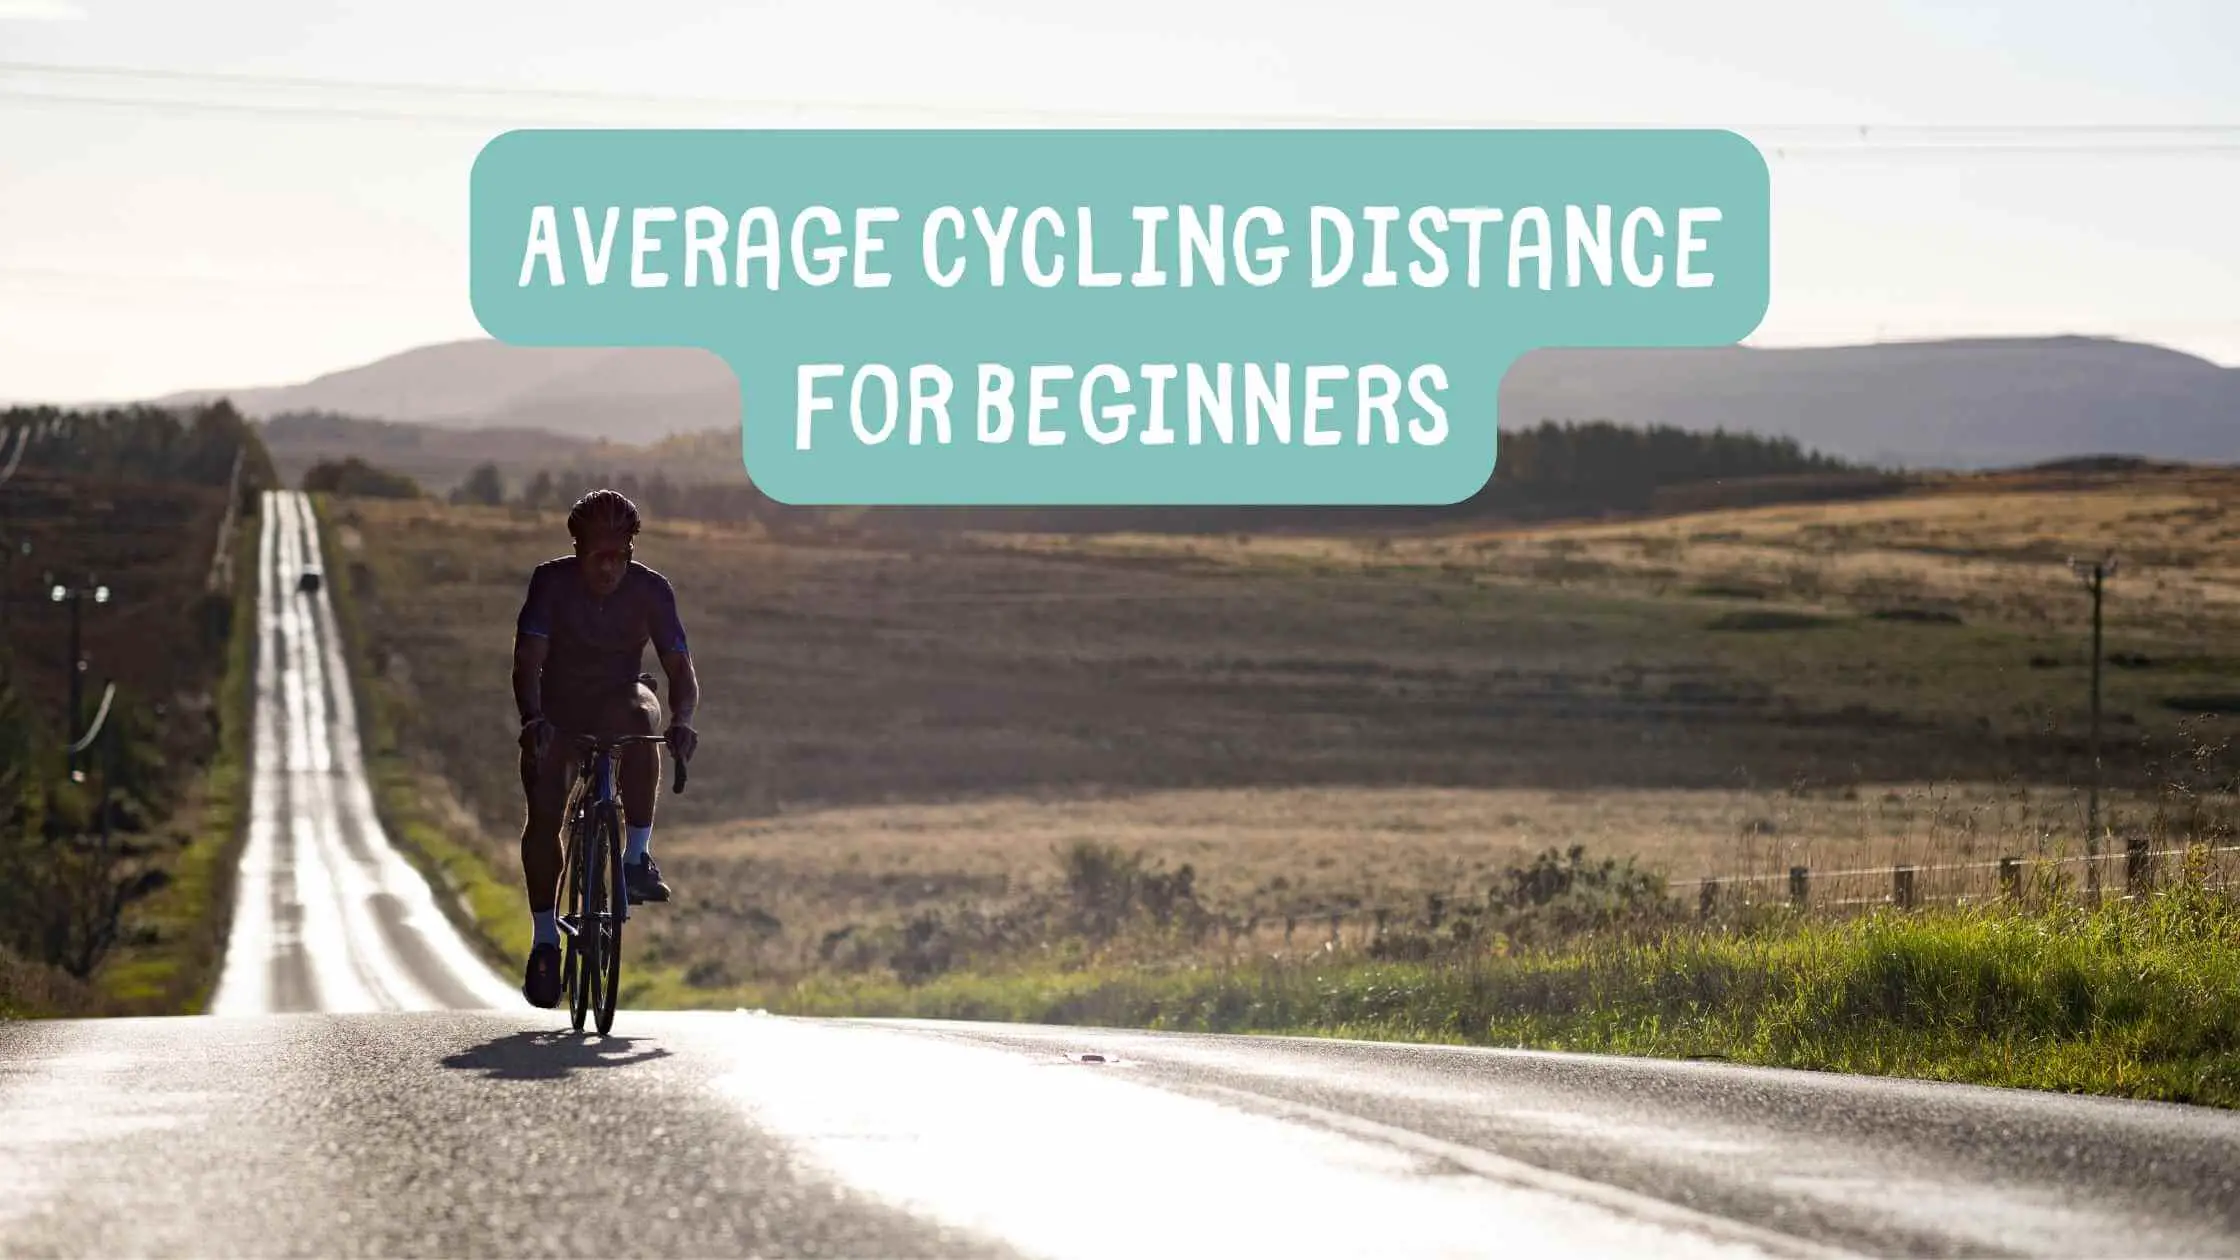 Average cycling distance for beginners.